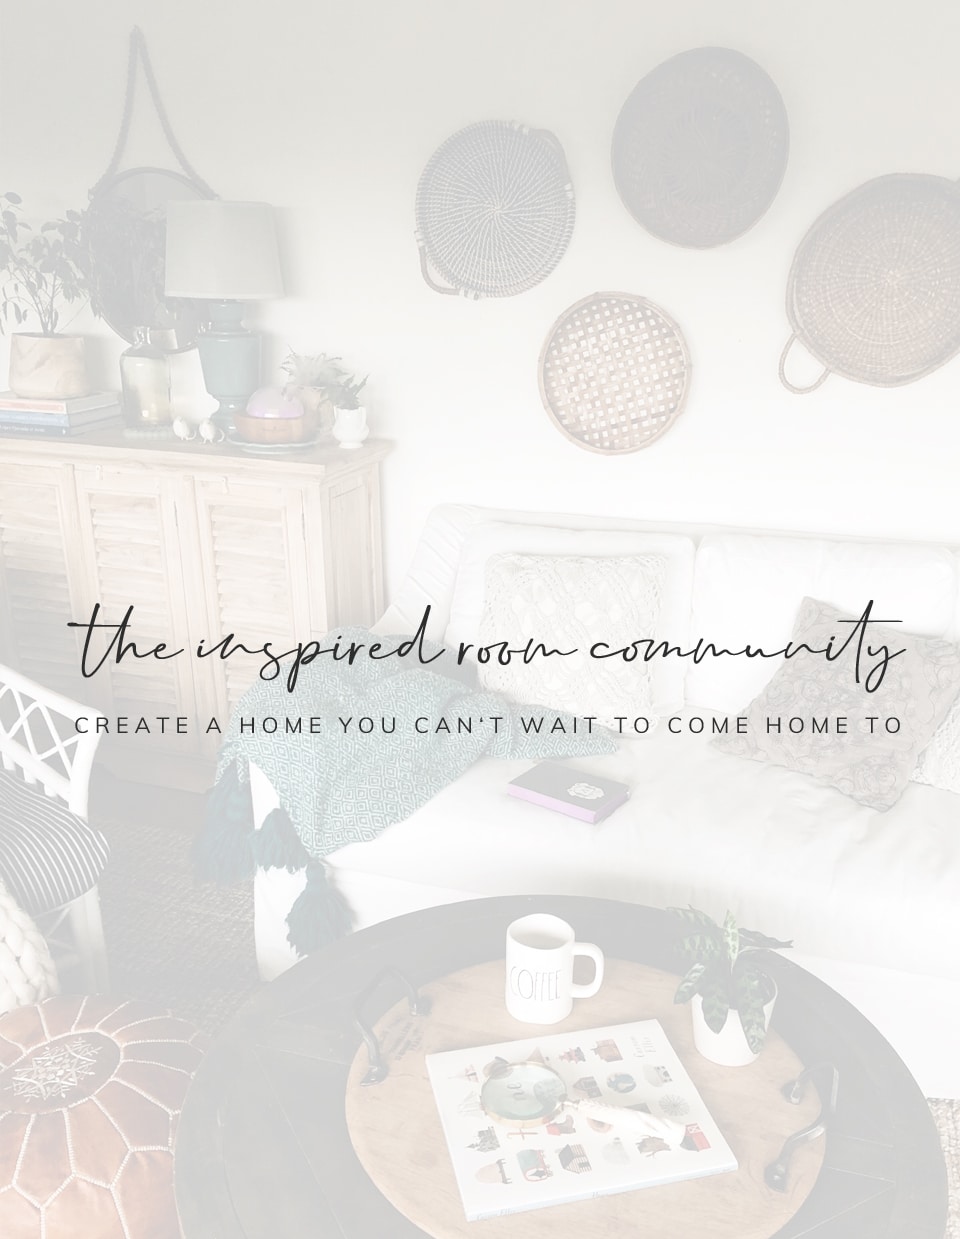 Join The Inspired Room Community! (Free Group for You!)